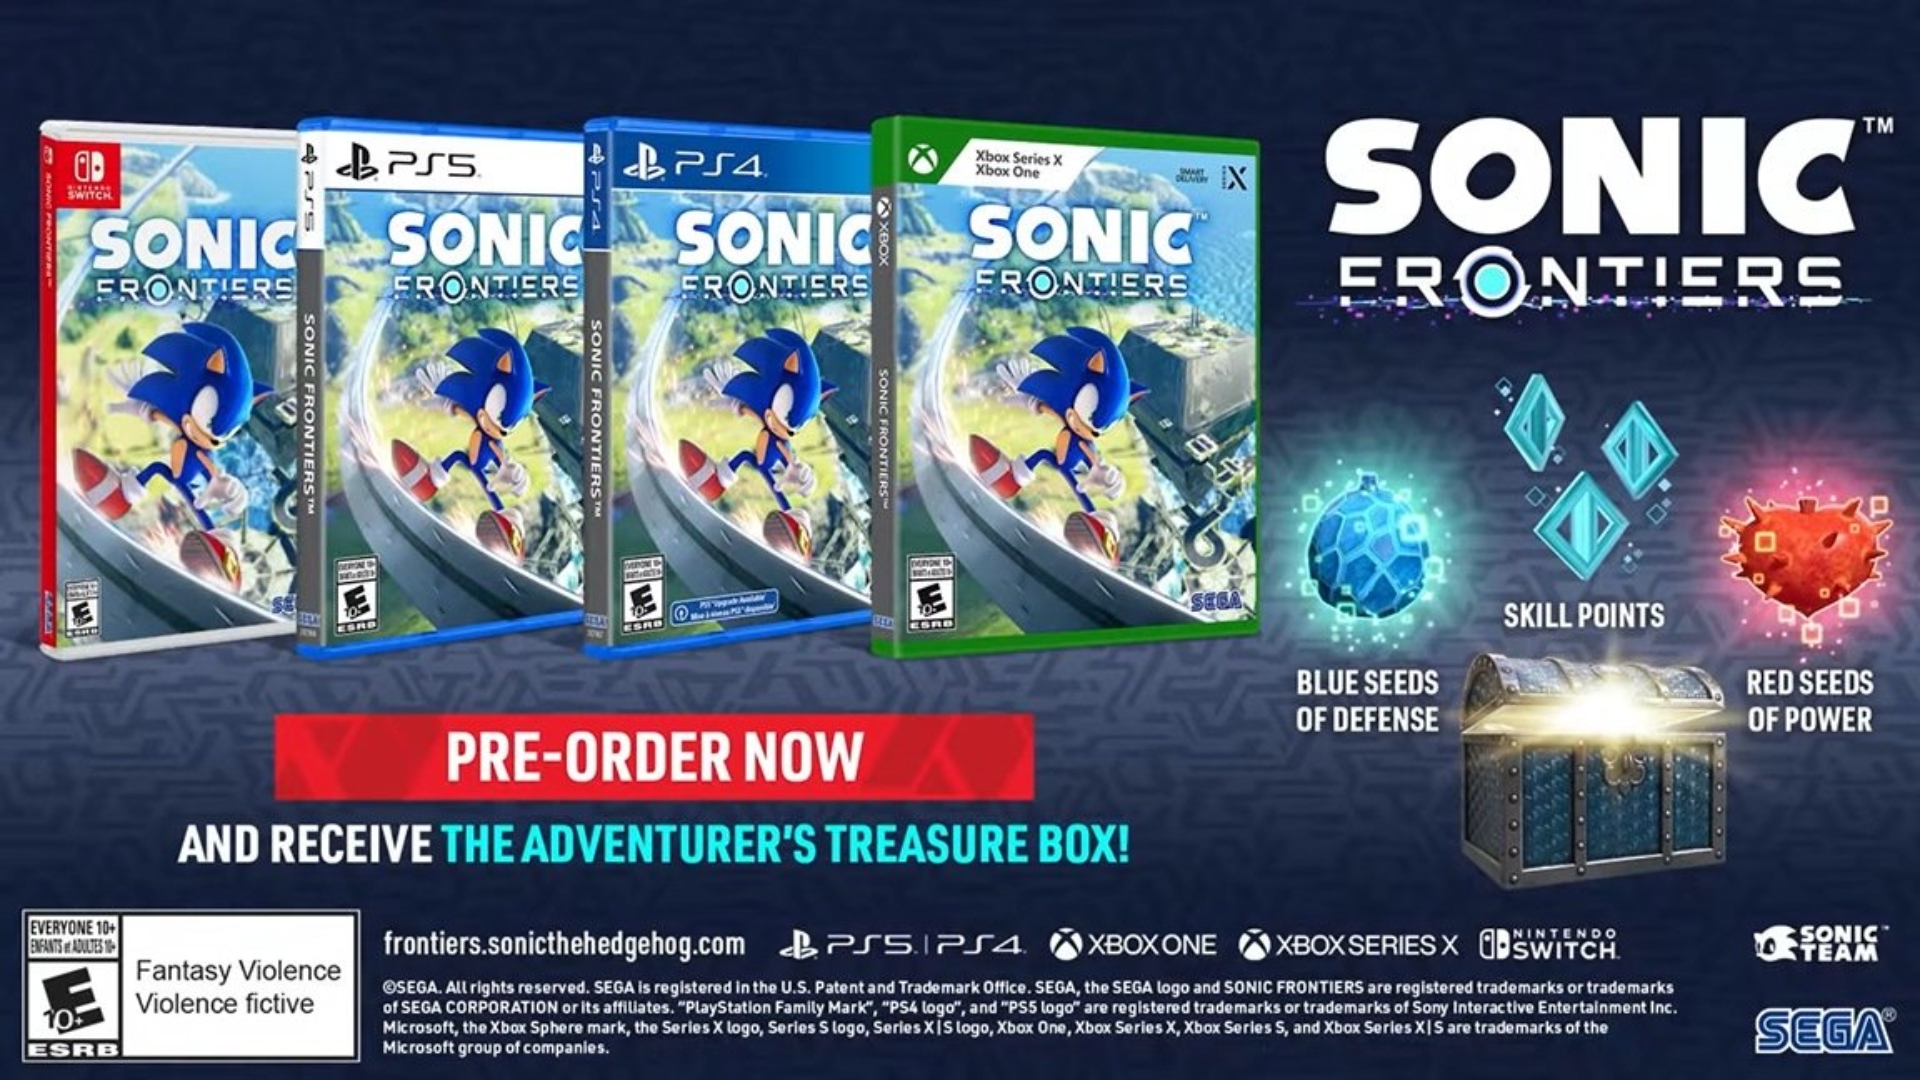 Sonic Frontiers pre-orders image showing copies of the game on Nintendo Switch, PS5, PS4, and Xbox, as well as the details of the Adventurer's Treasure Box, detailed below.